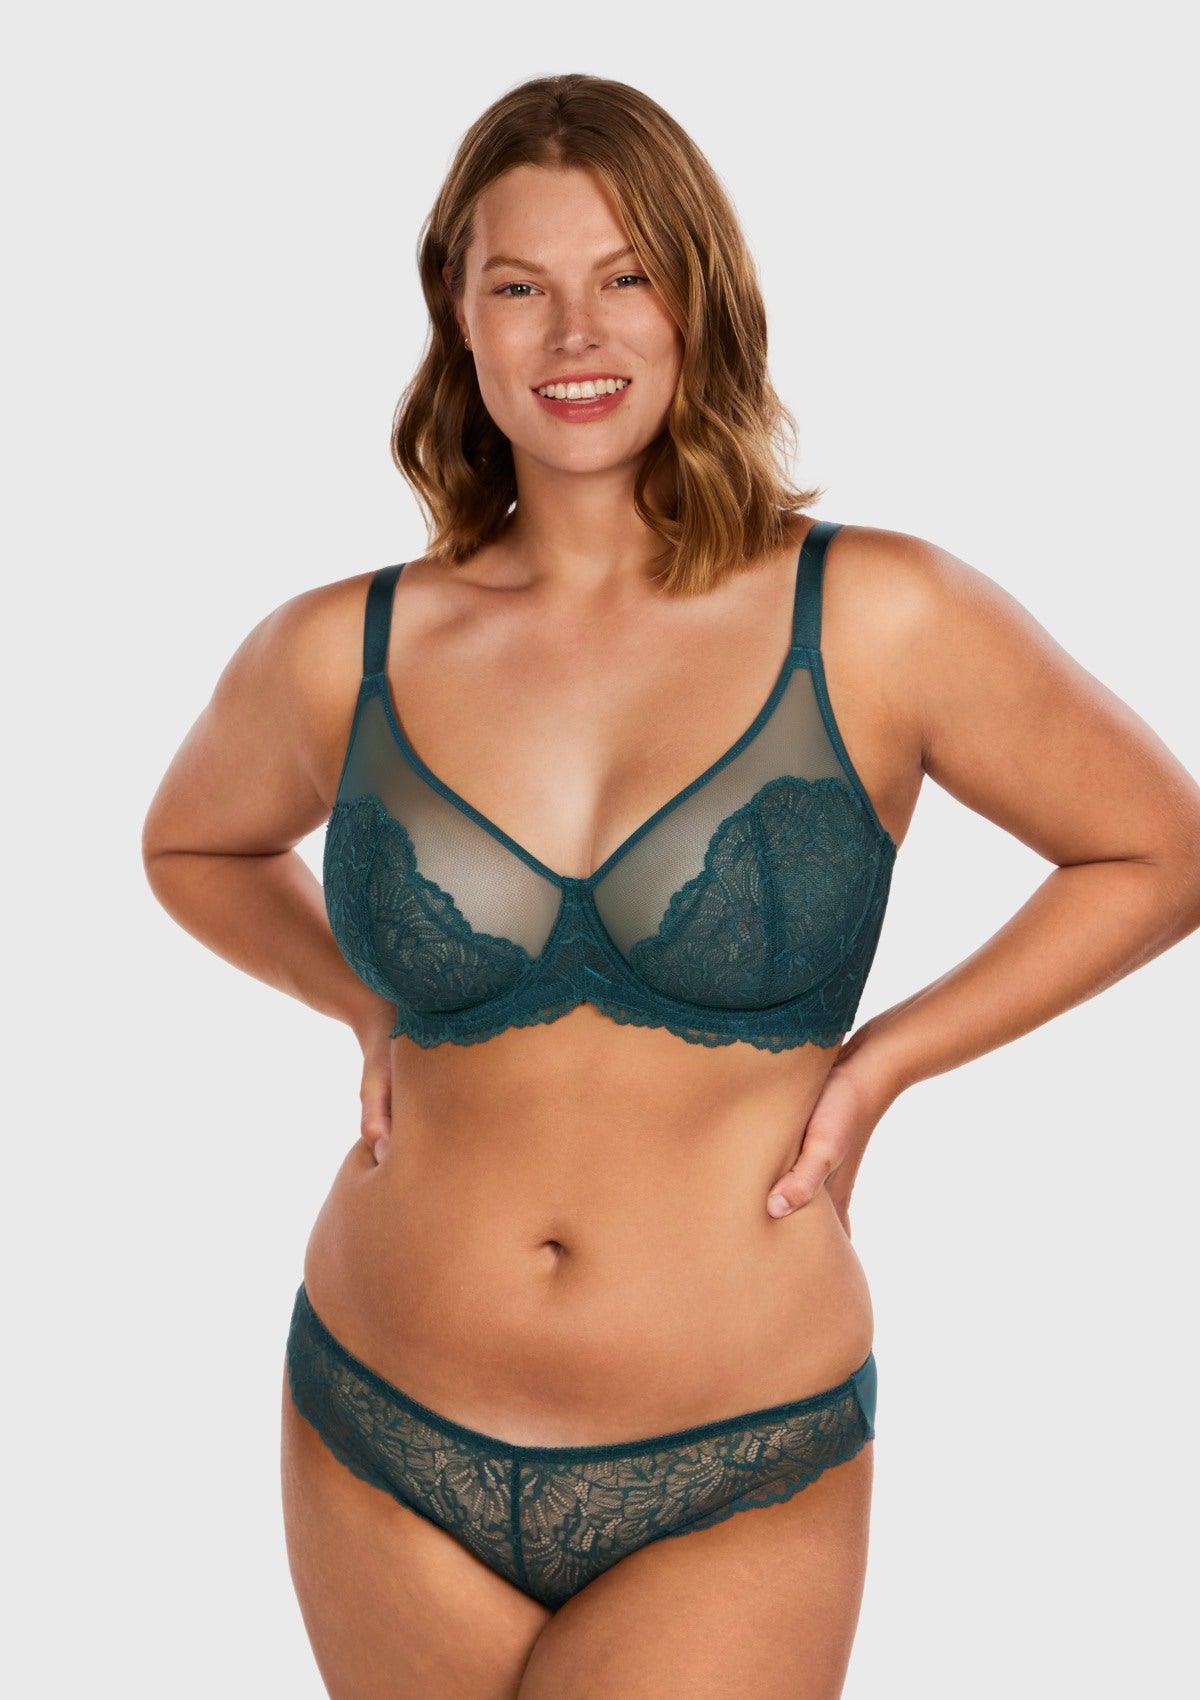 HSIA Blossom Full Figure See-Through Lace Bra For Side And Back Fat - Biscay Blue / 36 / D